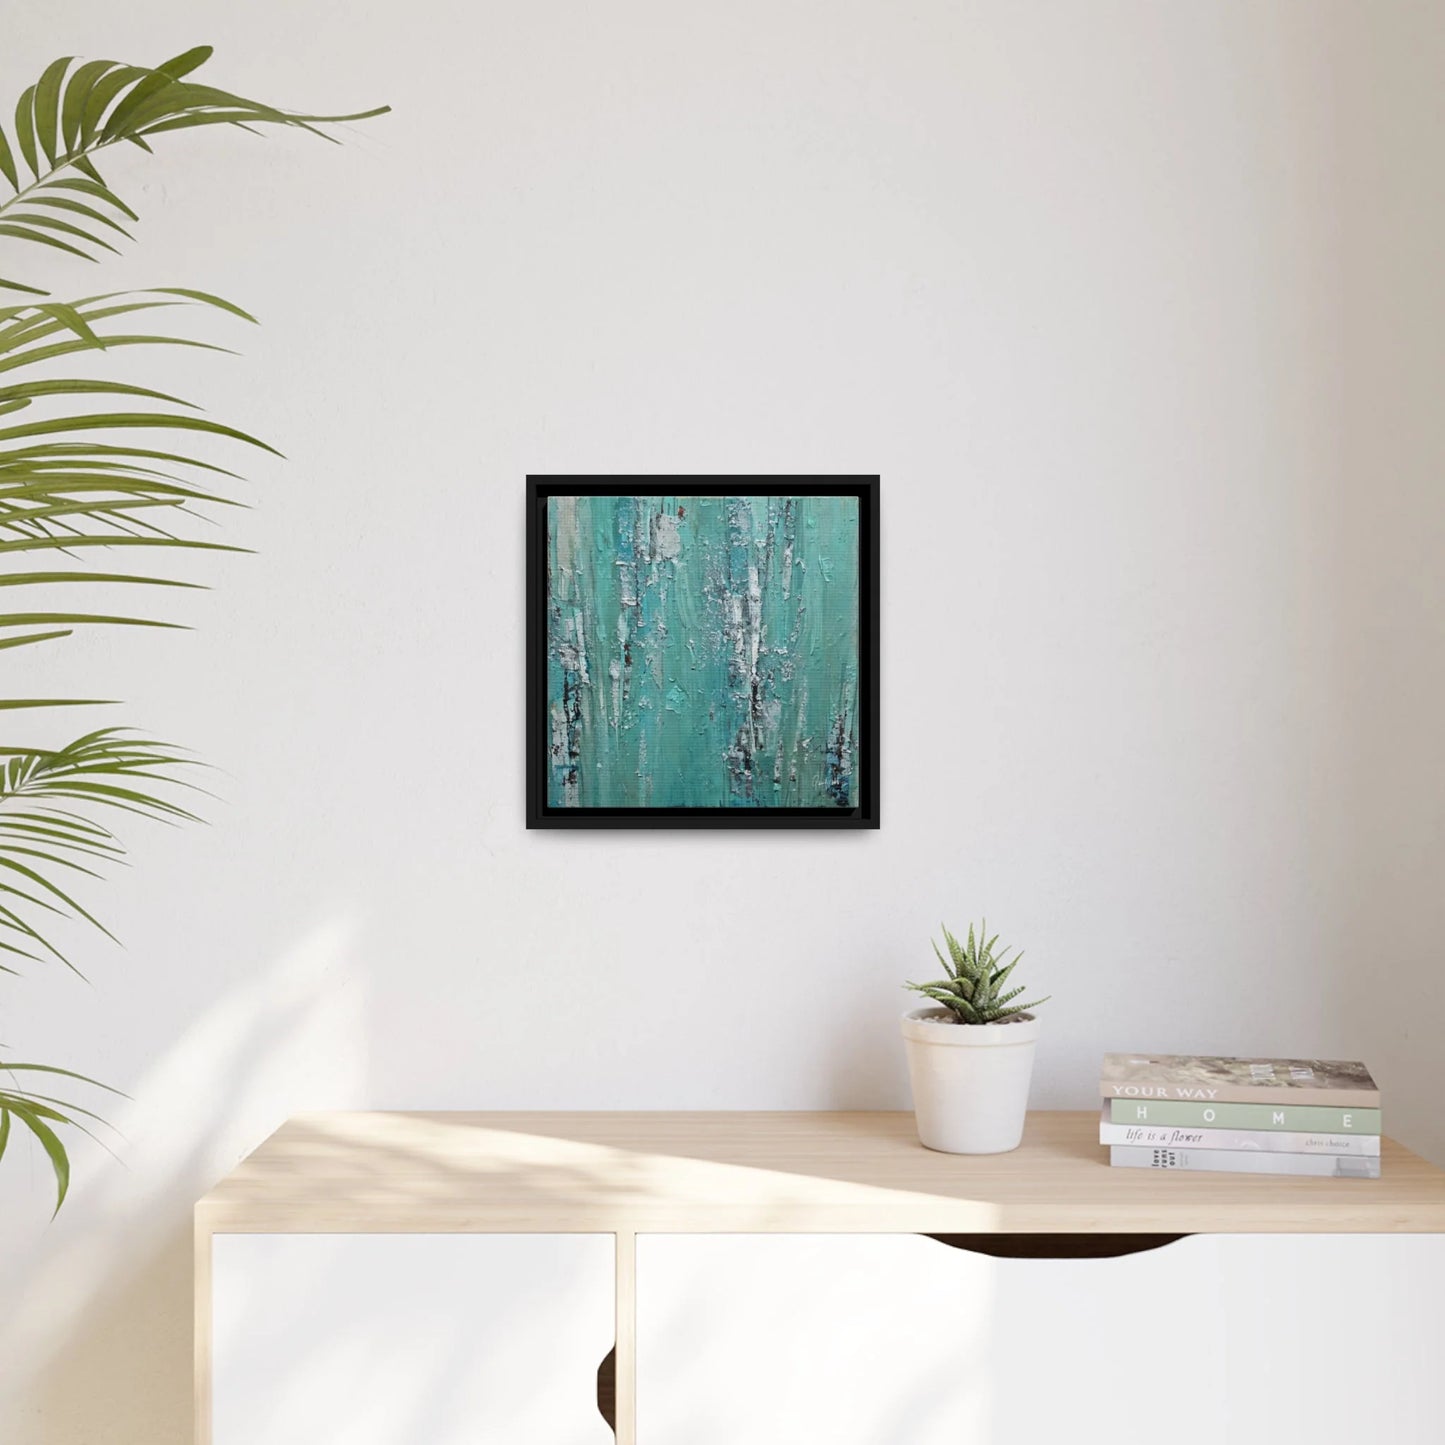 "Premium Canvas Wall Art with Frame and Eco-Friendly H20 - by Queennoble"